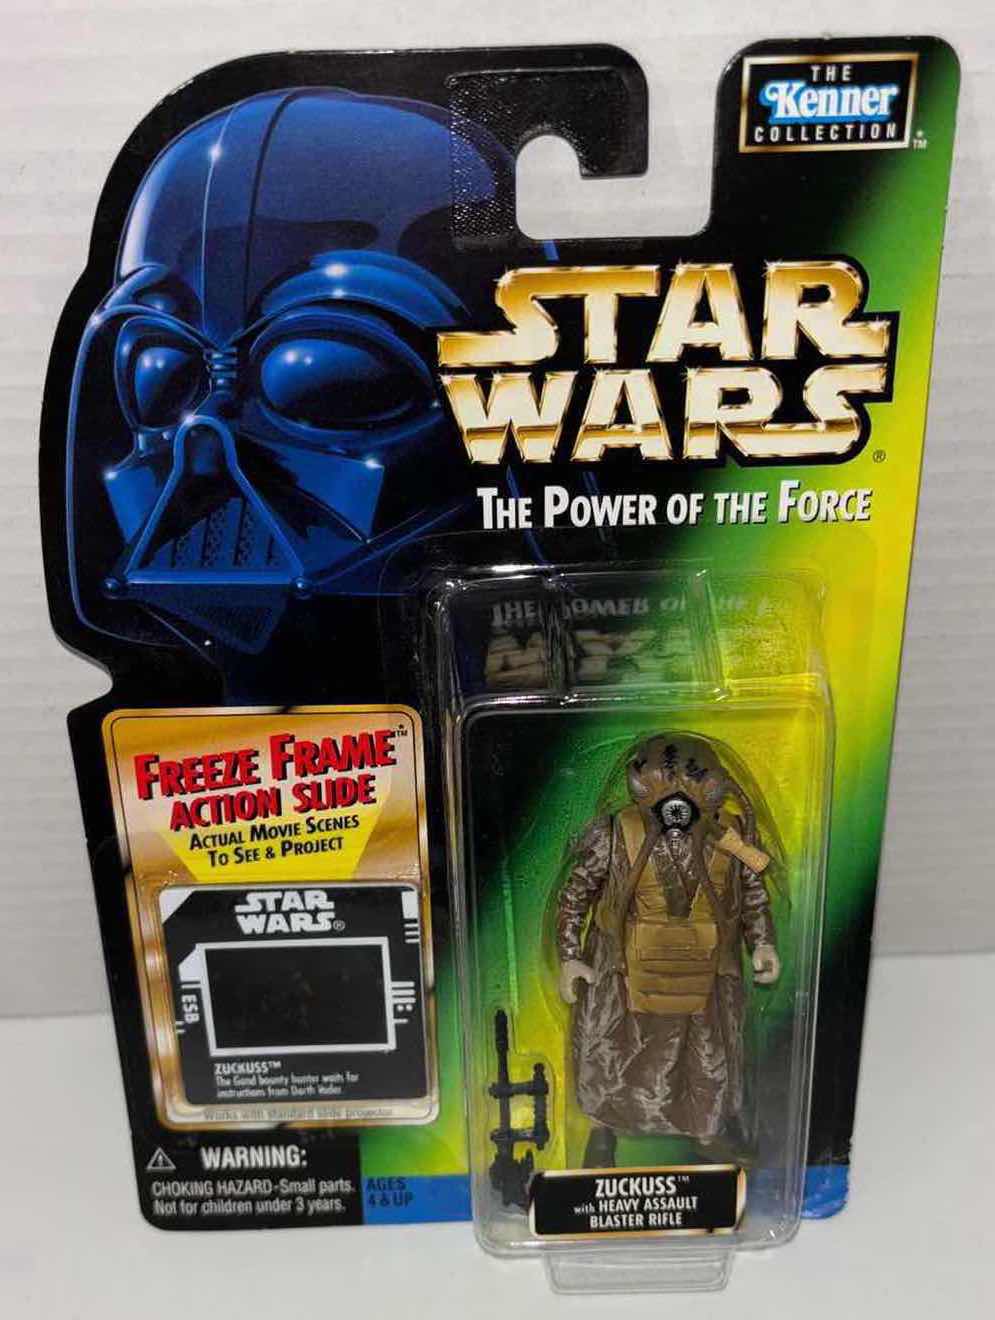 Photo 1 of NEW KENNER STAR WARS POWER OF THE FORCE ACTION FIGURE, ZUCKUSS W HEAVY ASSAULT BLASTER RIFLE & FREEZE FRAME ACTION SLIDE